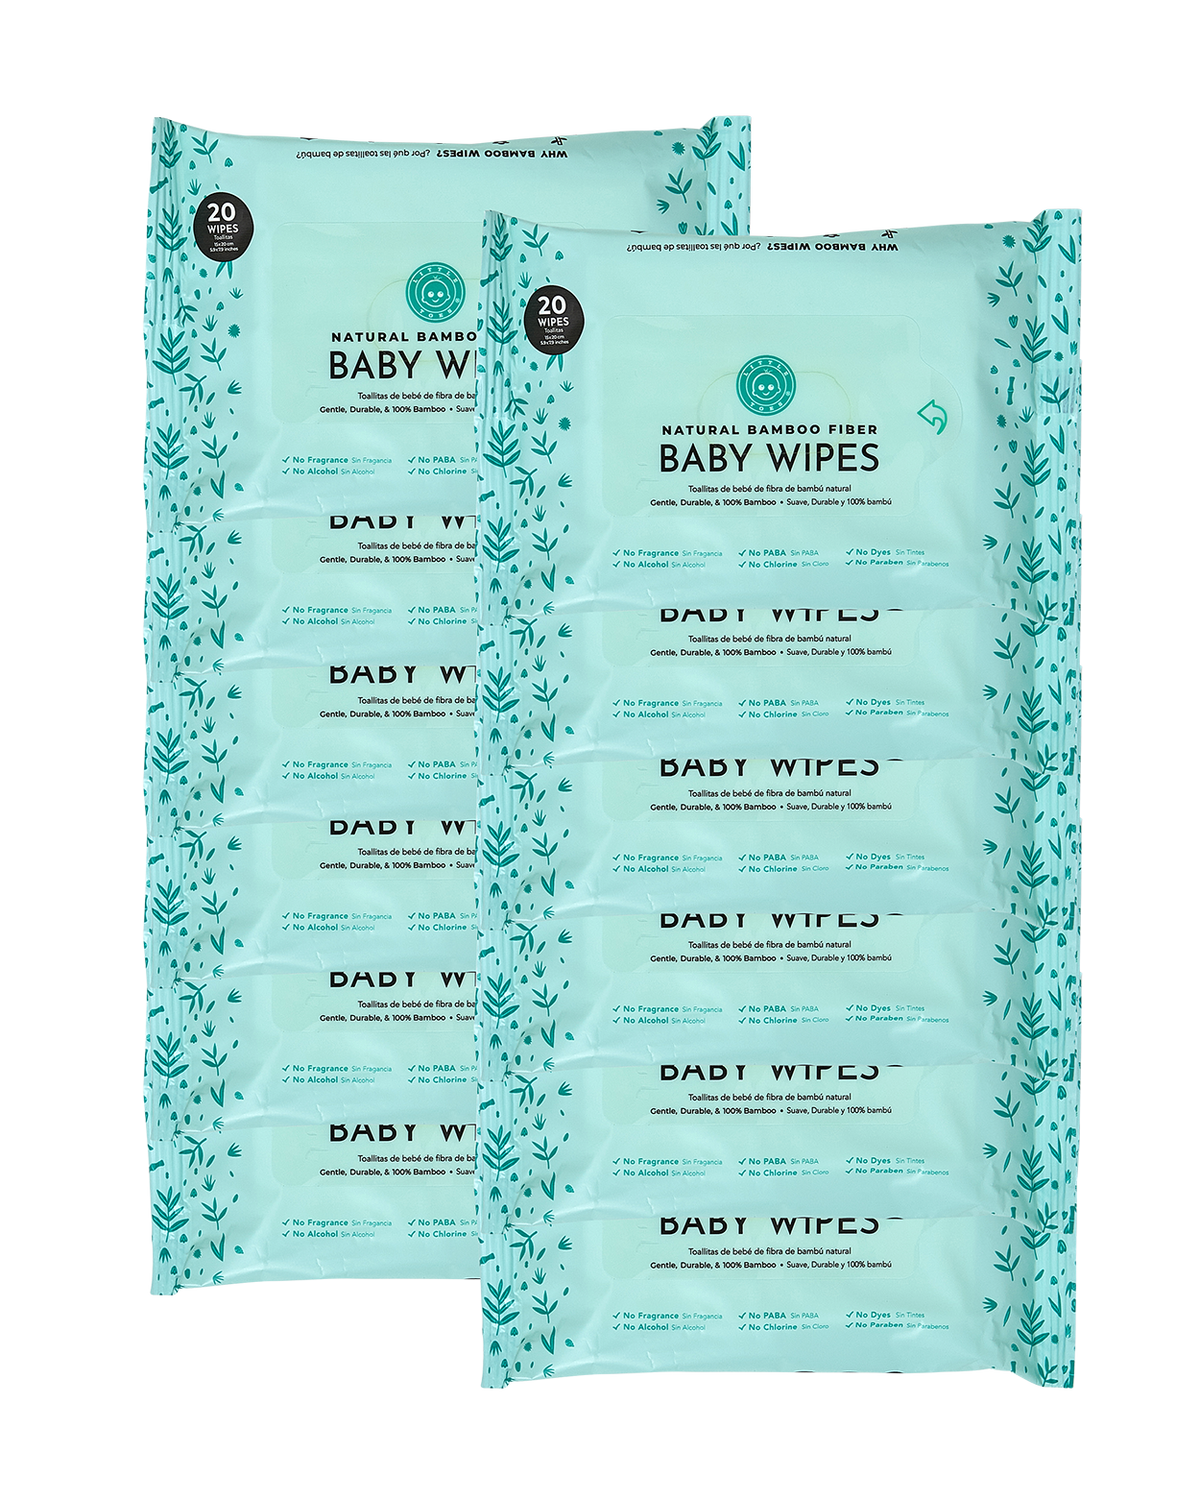 Little Toes Natural Bamboo Fiber Baby Wipes- 12 Packs of 20 Wipes (240 Wipes)